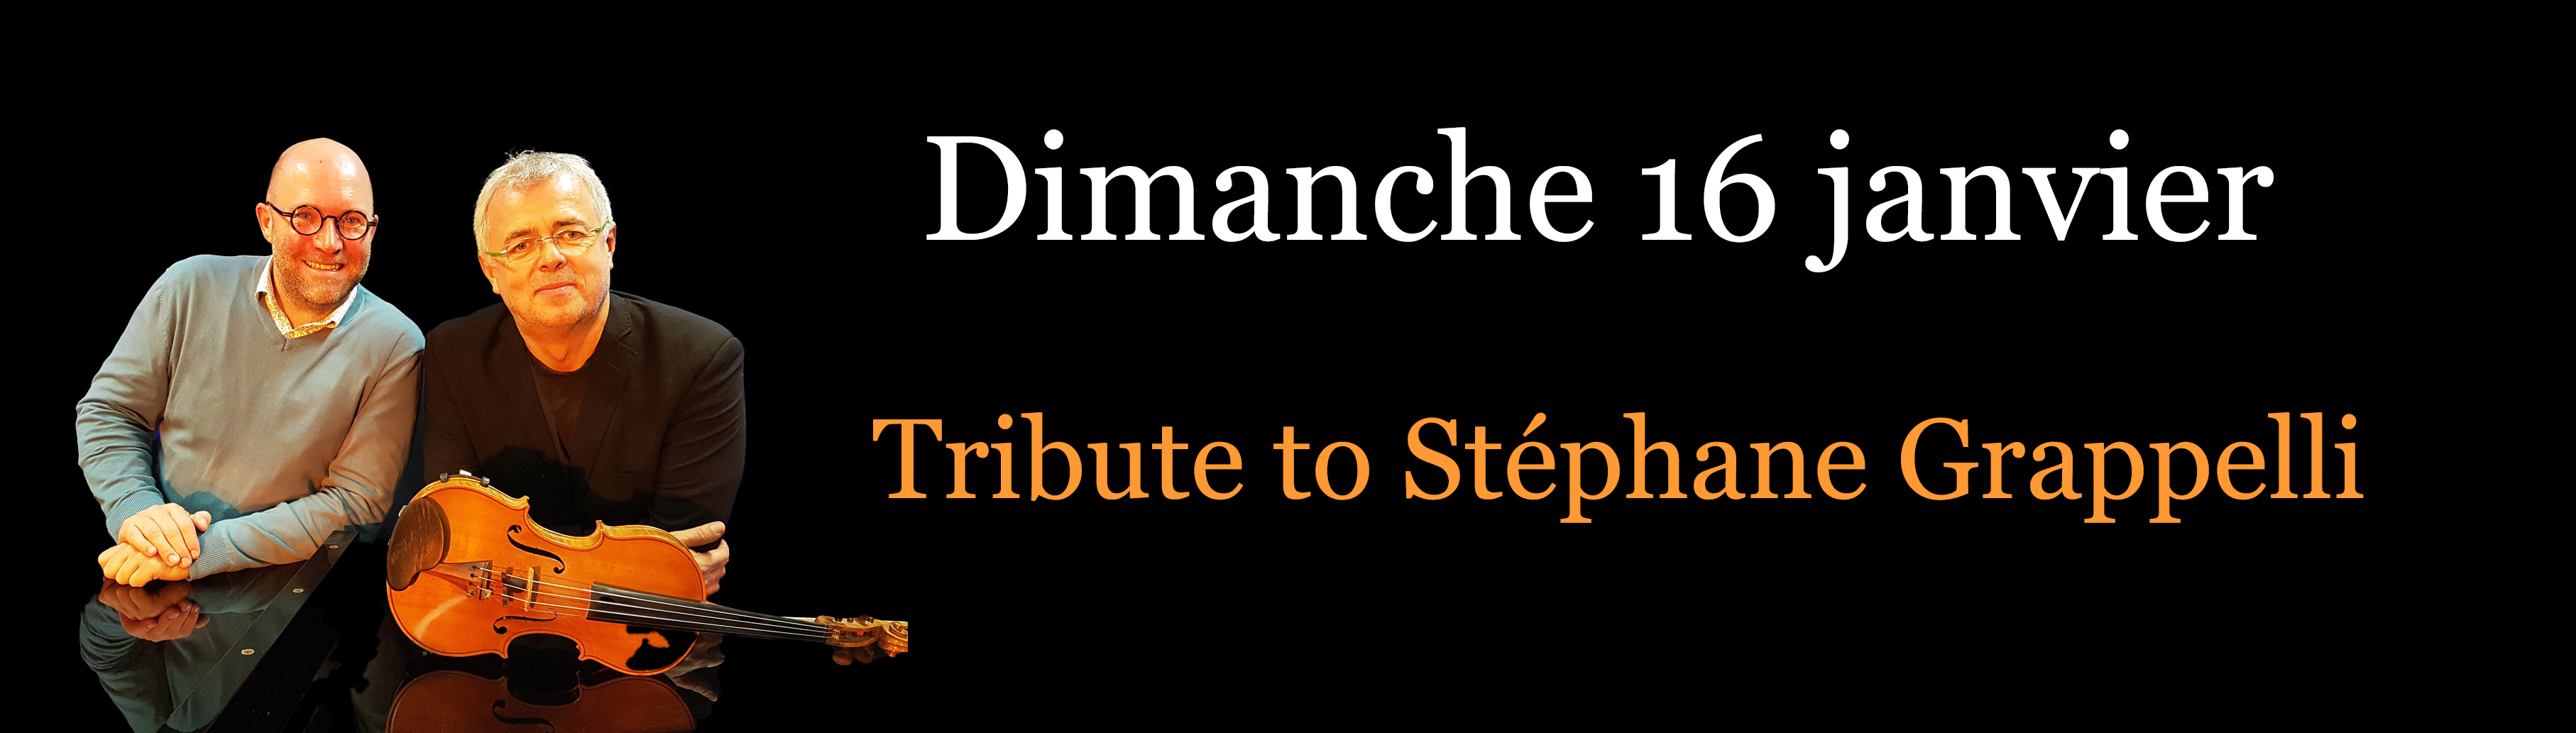 Tribute to Stéphane Grappelli